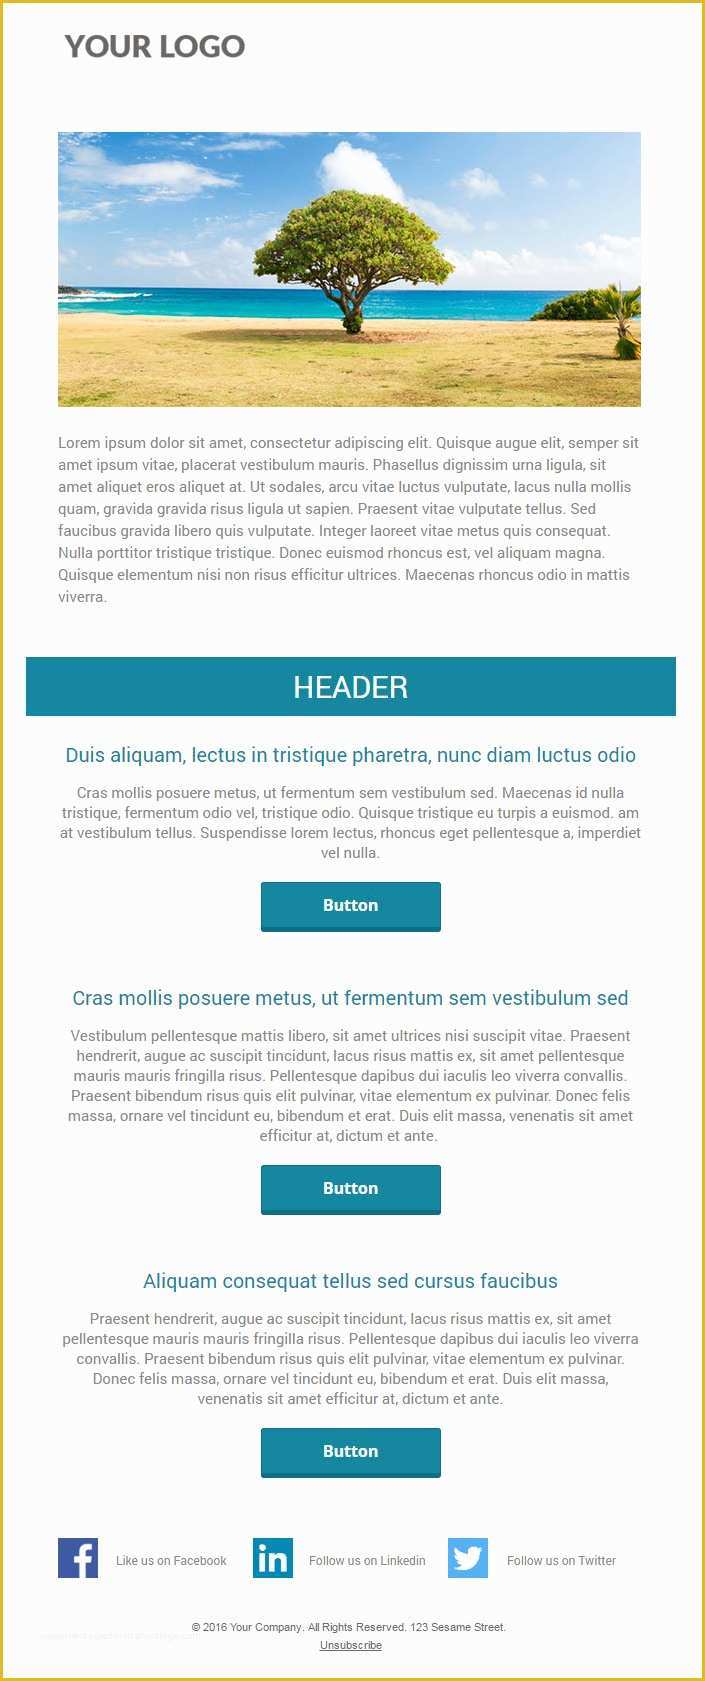 Free Video Email Templates Of 6 Free Responsive Marketo Email Templates